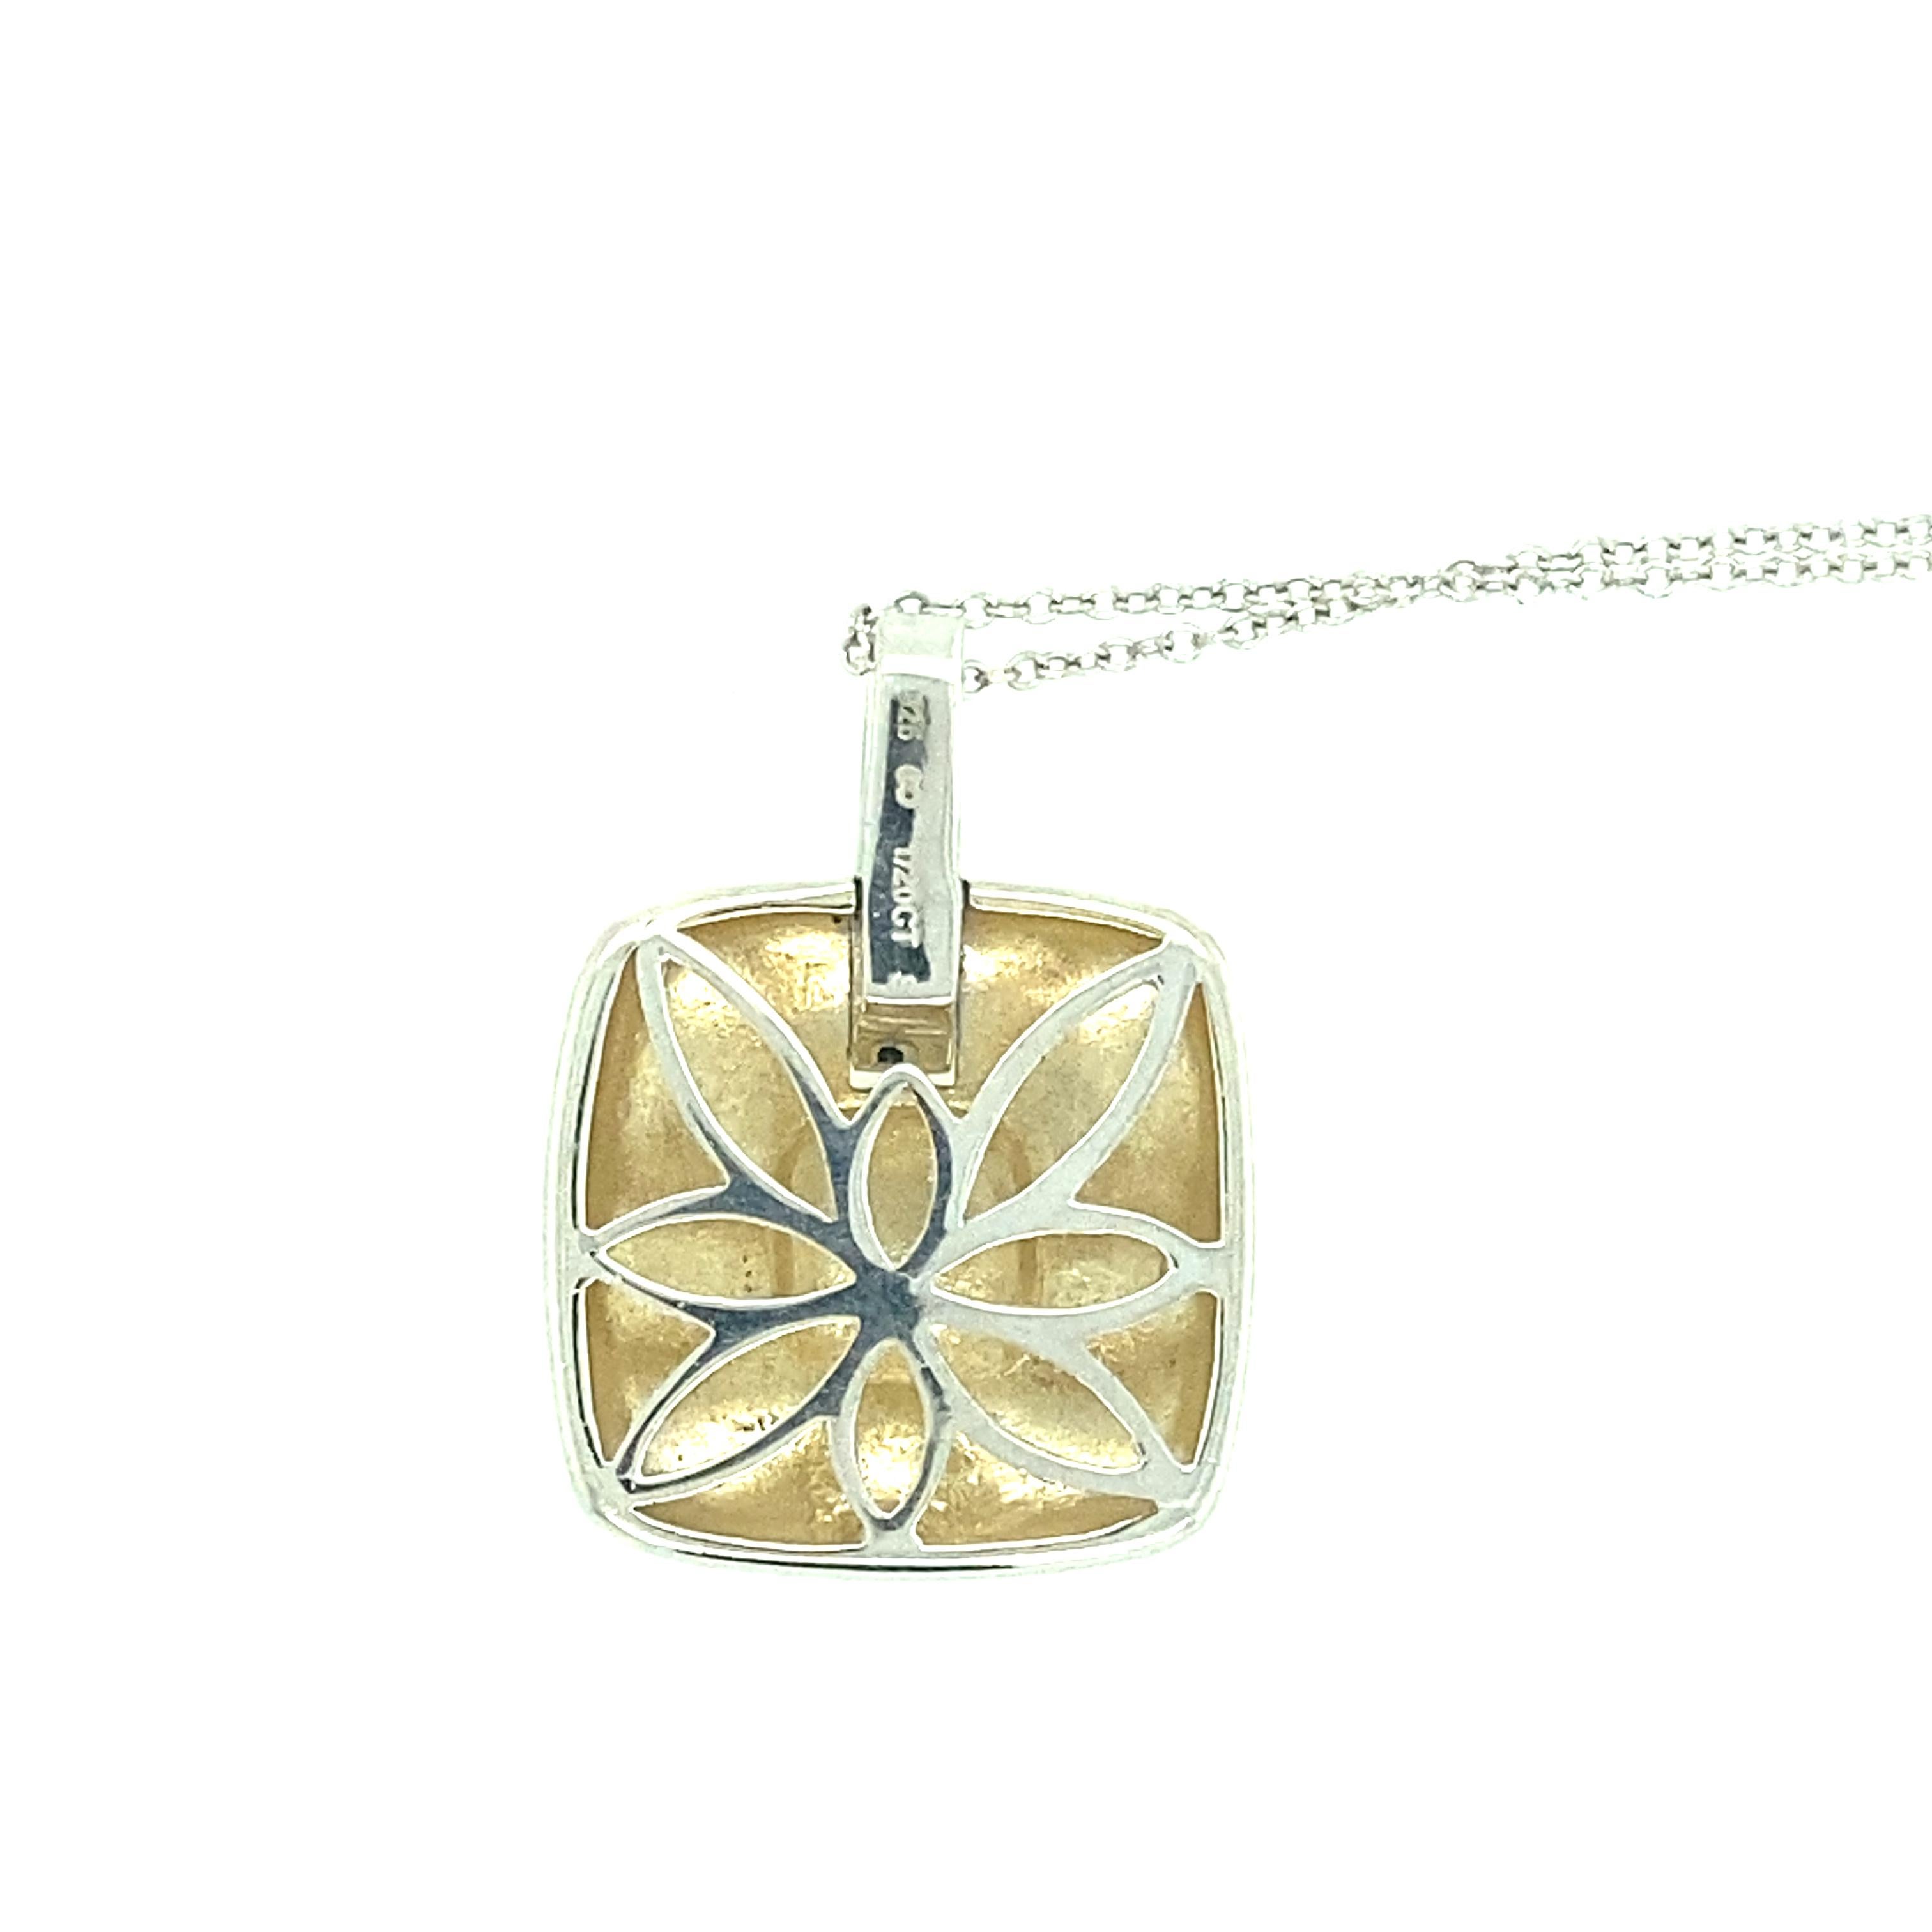 One sterling silver vermeil (stamped 925 1/20CT S)  square shaped pendant set with diamonds, 0.07 carat total weight with matching I/J color and I1 clarity.  The pendant measures one inch long and is suspended from an 18 inch sterling silver cable